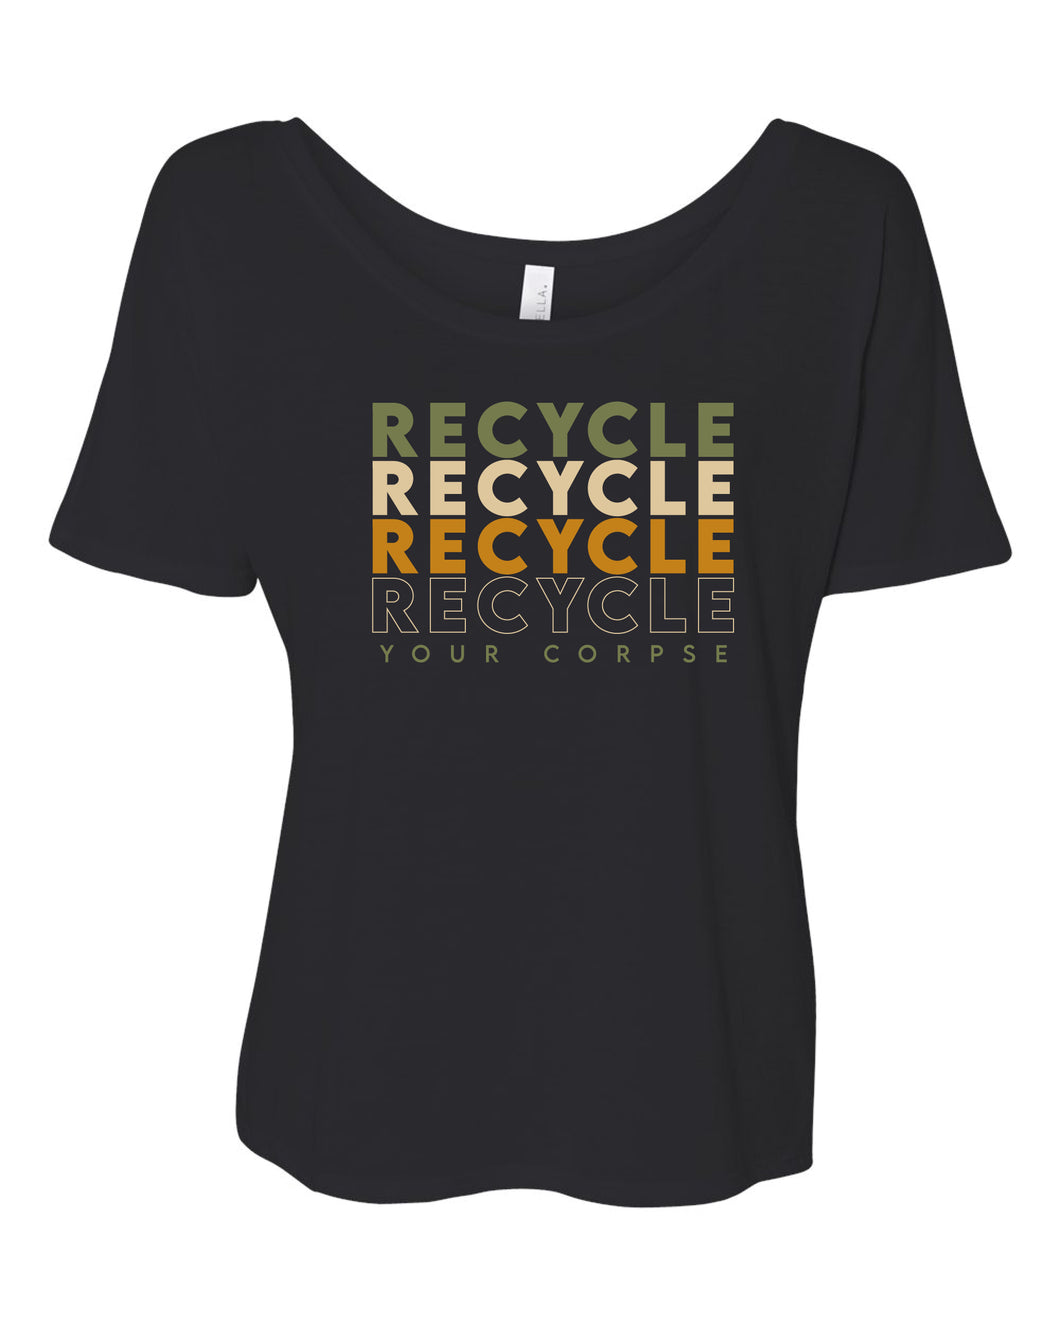 Recycle Recycle Recycle Your Corpse Slouchy Top